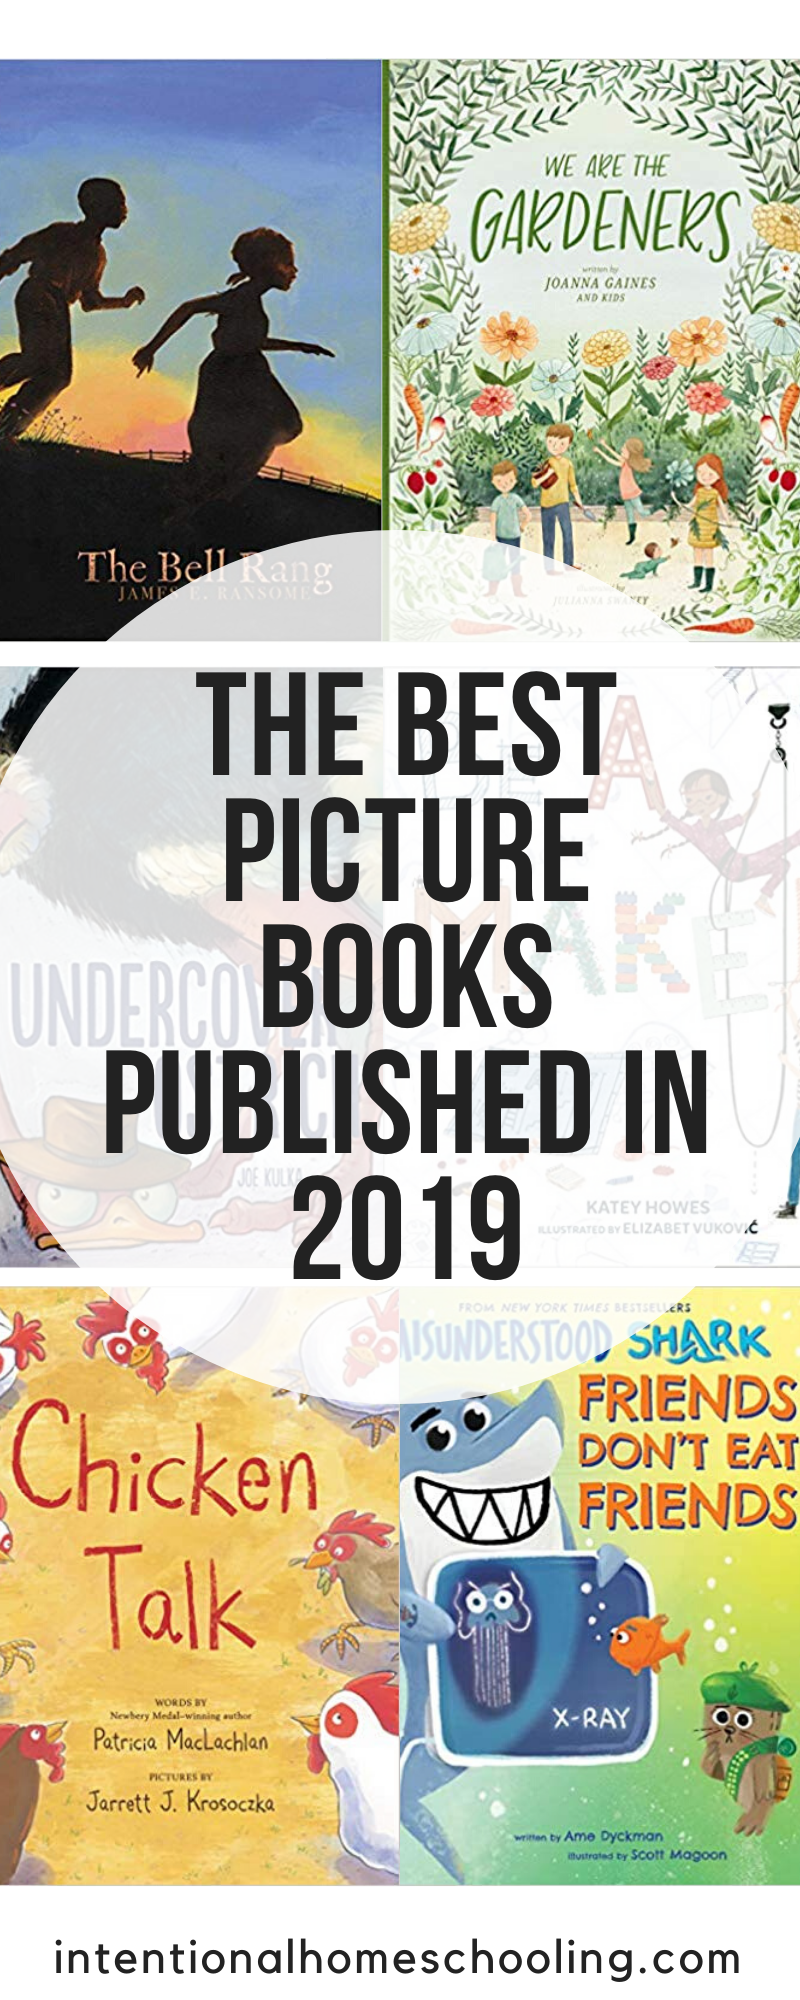 The Best Picture Books Published in 2019